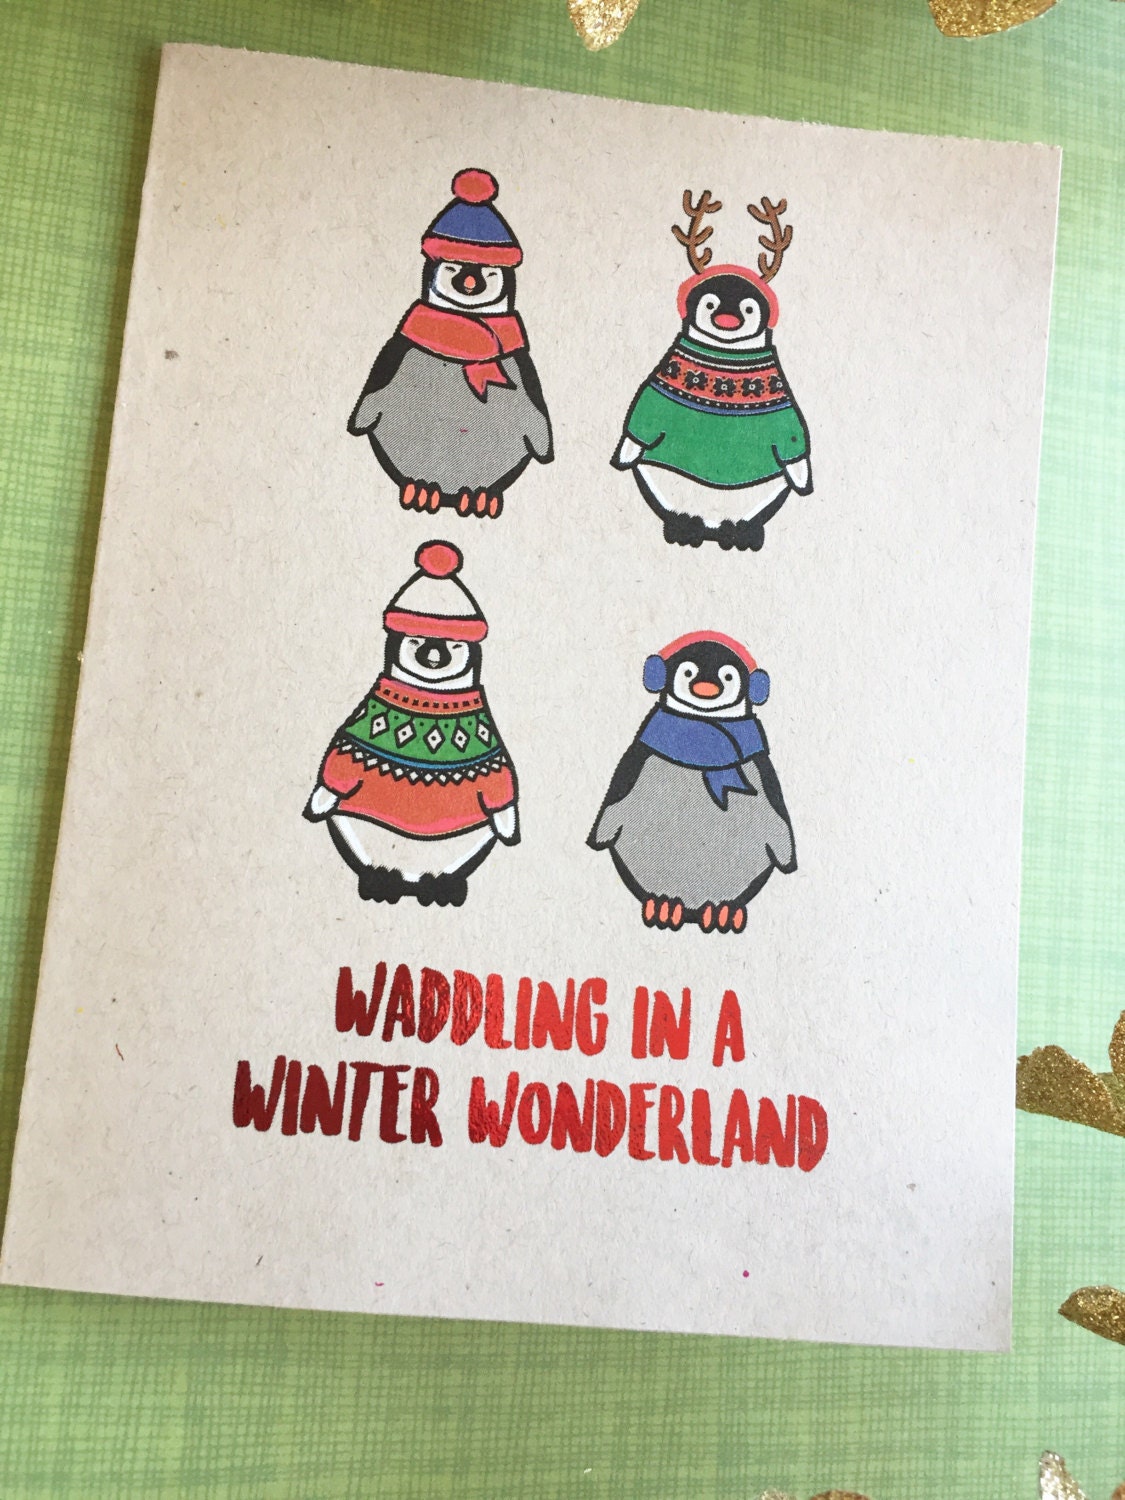 Penguin Christmas Card, Punny Cute Holiday Card, Penguin Sweater Card with foiled lettering